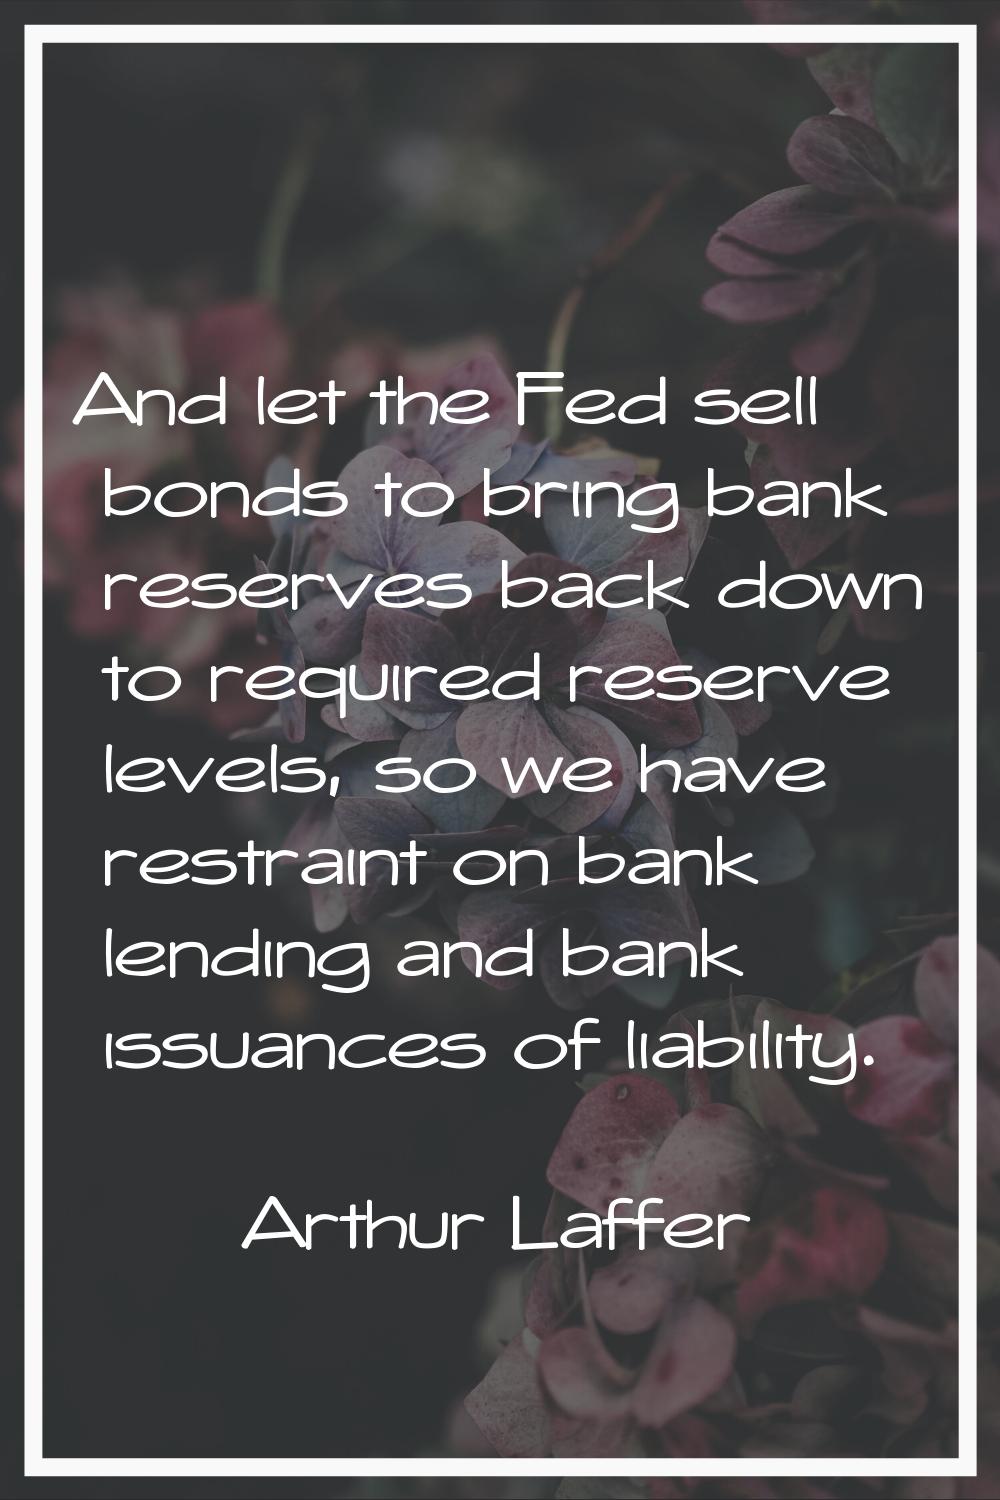 And let the Fed sell bonds to bring bank reserves back down to required reserve levels, so we have 